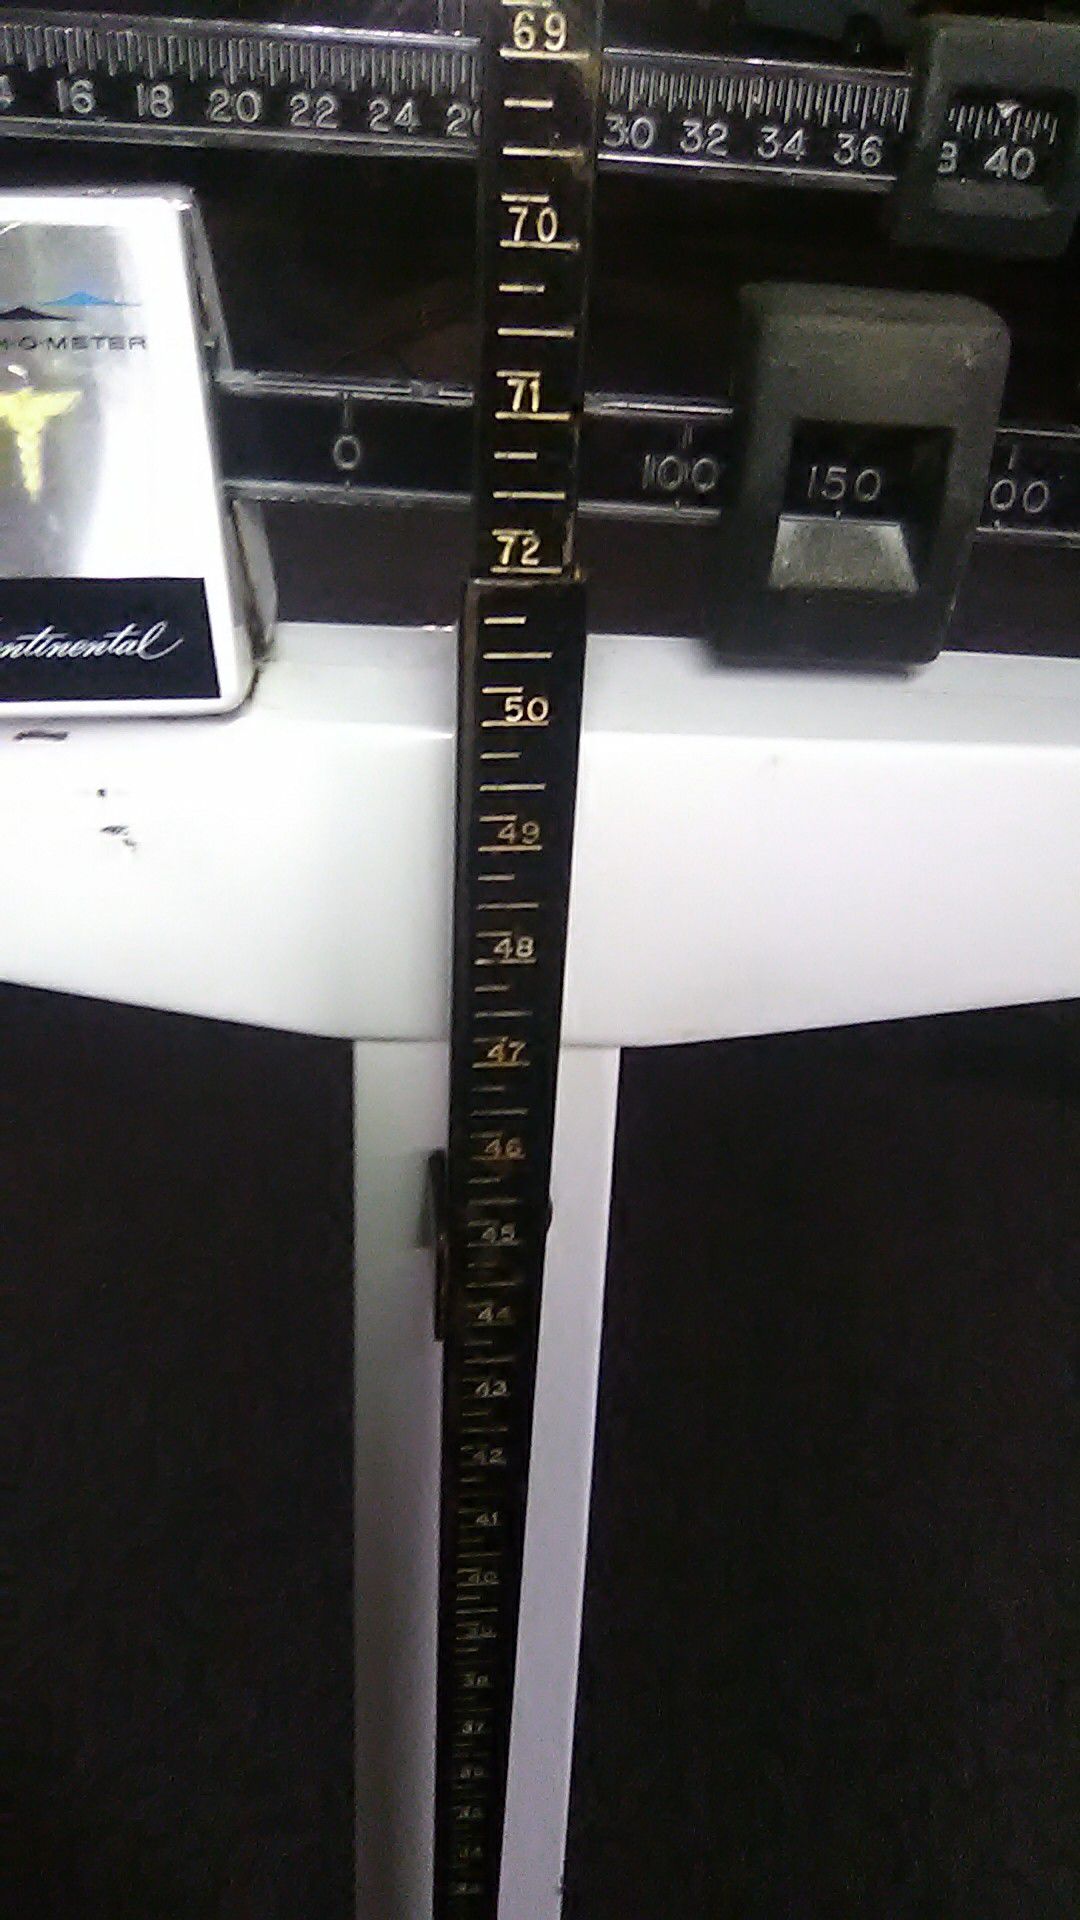 Health o meter by Continental 350 lb max weight and a maxheight 79"